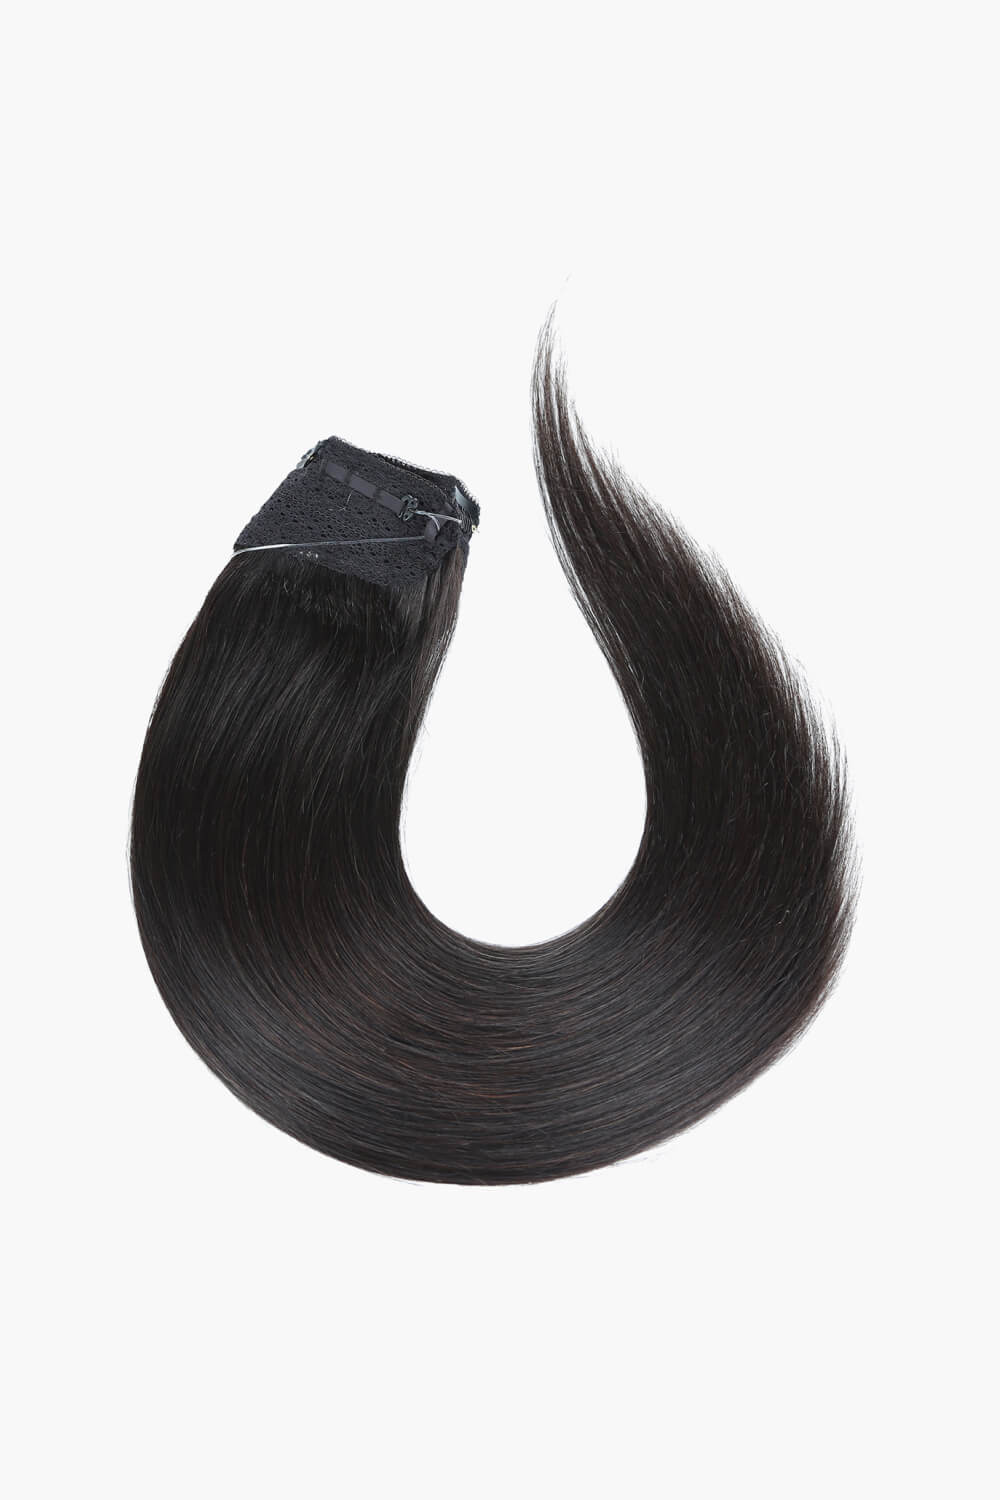 20" 100g Indian Human Halo Hair Extensions